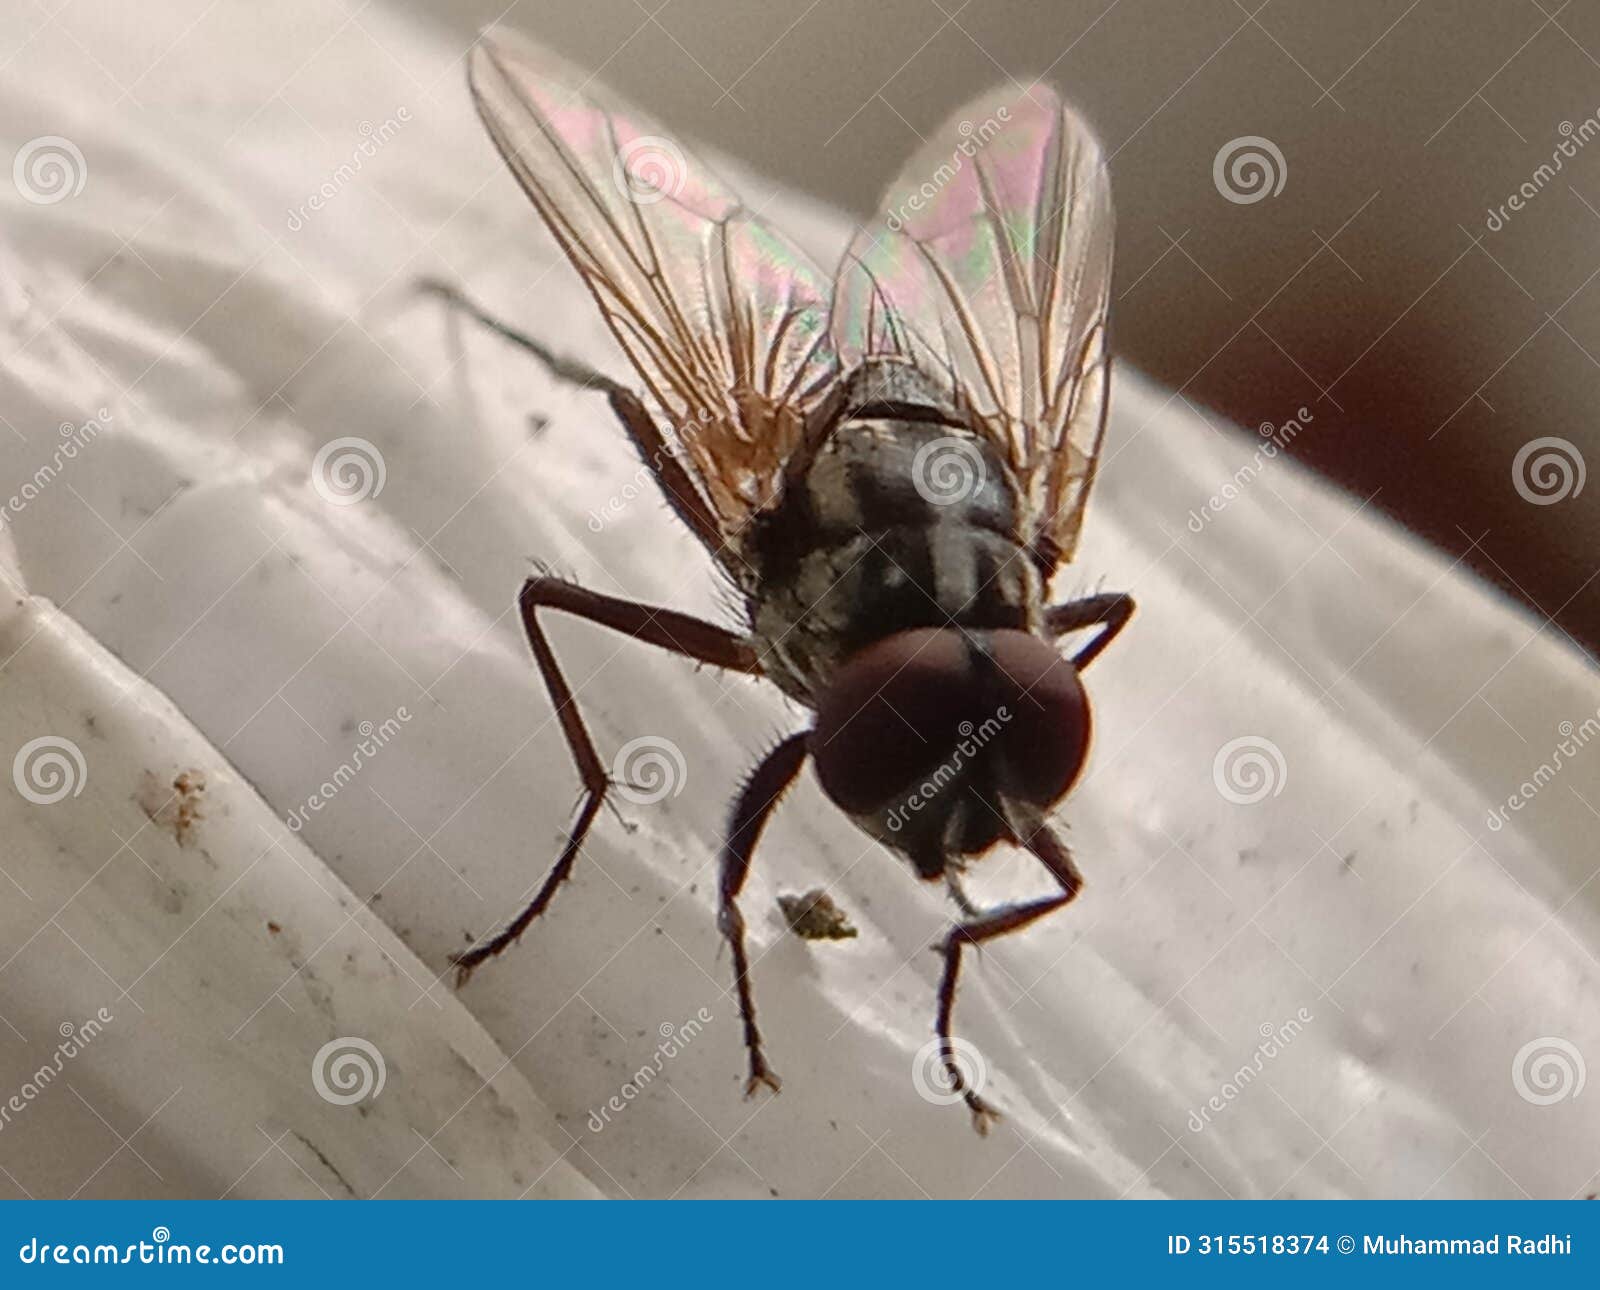 musca autumnalis, fly on plastic